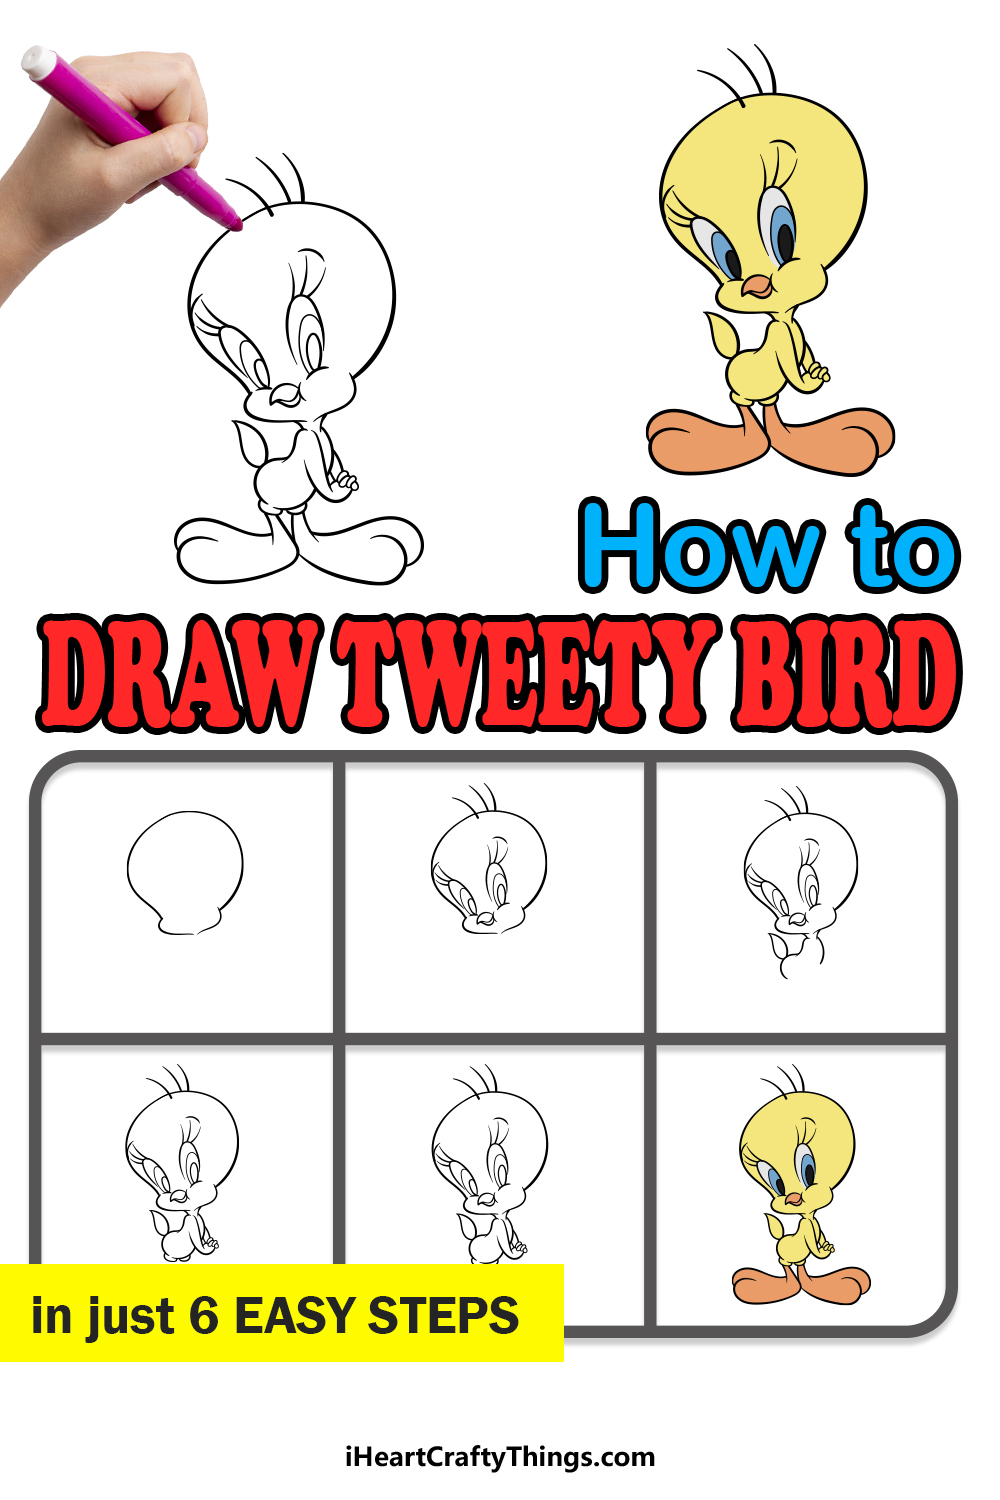 how to draw tweety bird in 6 easy steps